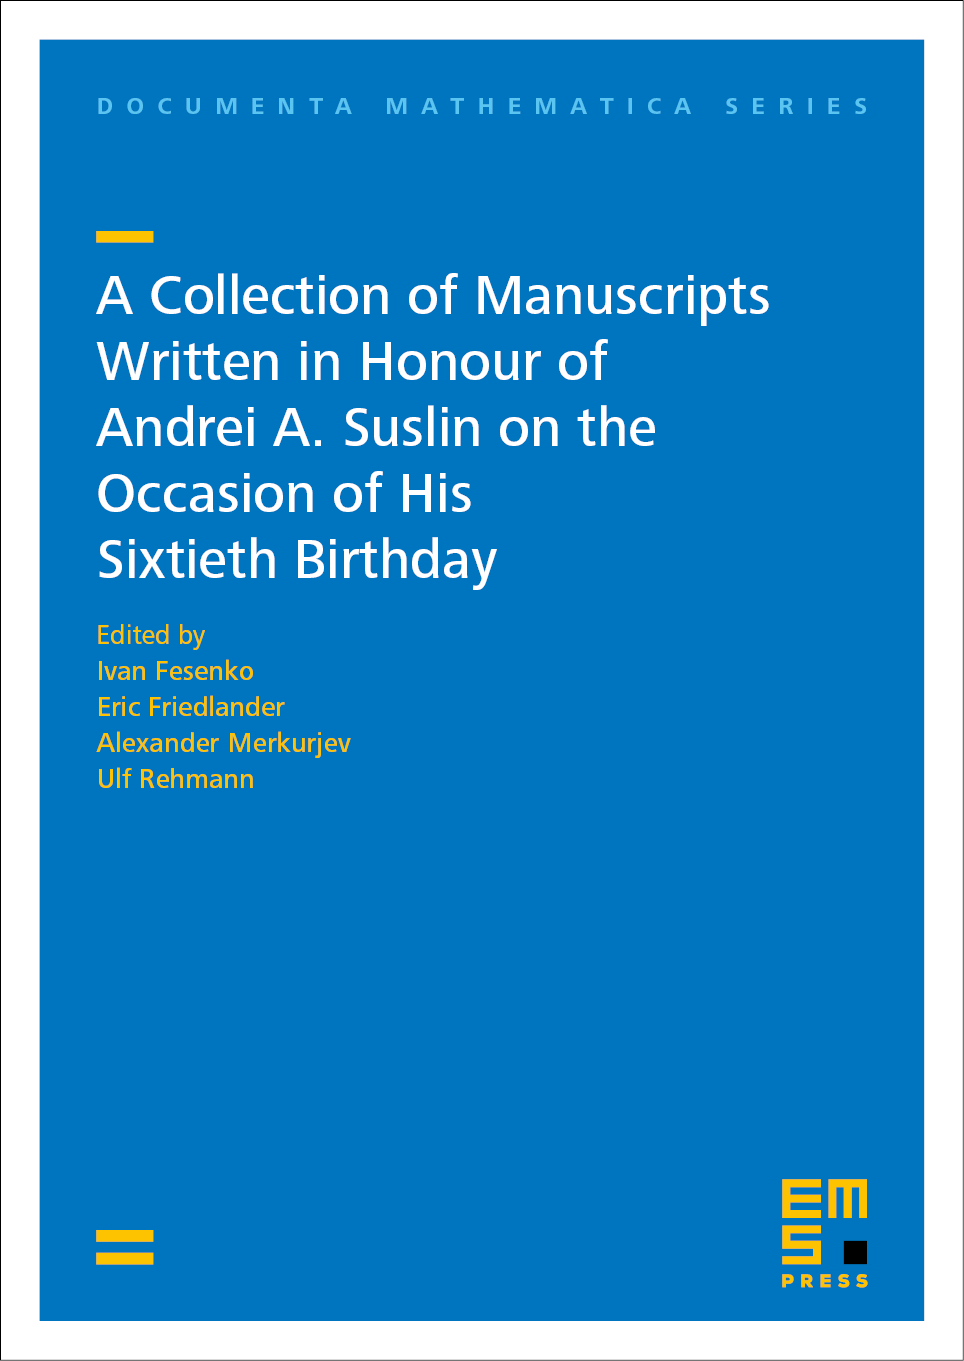 A Collection of Manuscripts Written in Honour of Andrei A. Suslin on the Occasion of His Sixtieth Birthday cover